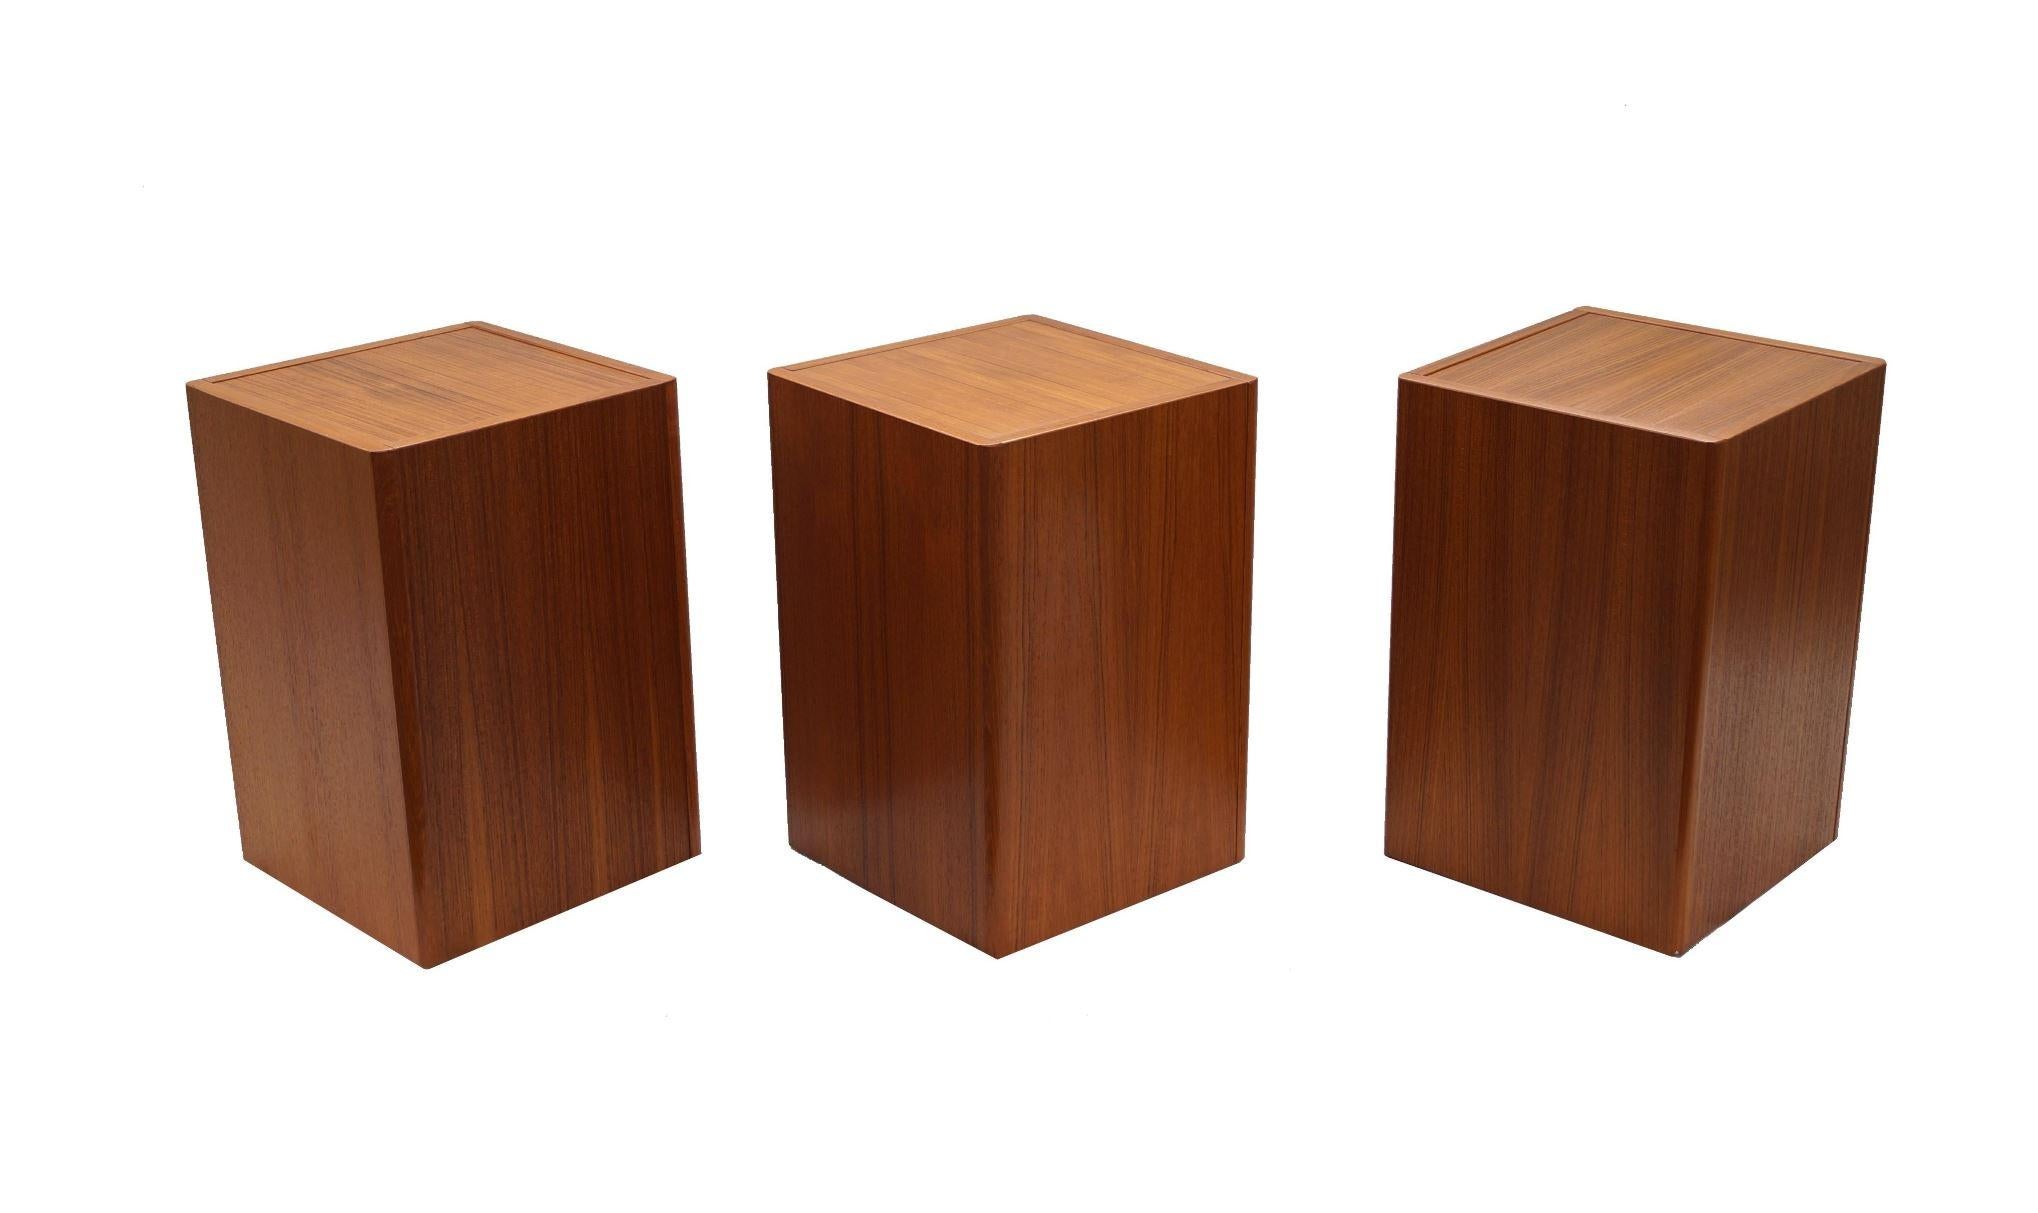 Danish modern set of 3  teak pedestals , plant stands , small side or accent tables
If you are in the New Jersey, New York City Metro Area, please contact us with your delivery zipcode, as we may be able to deliver curbside for less than the